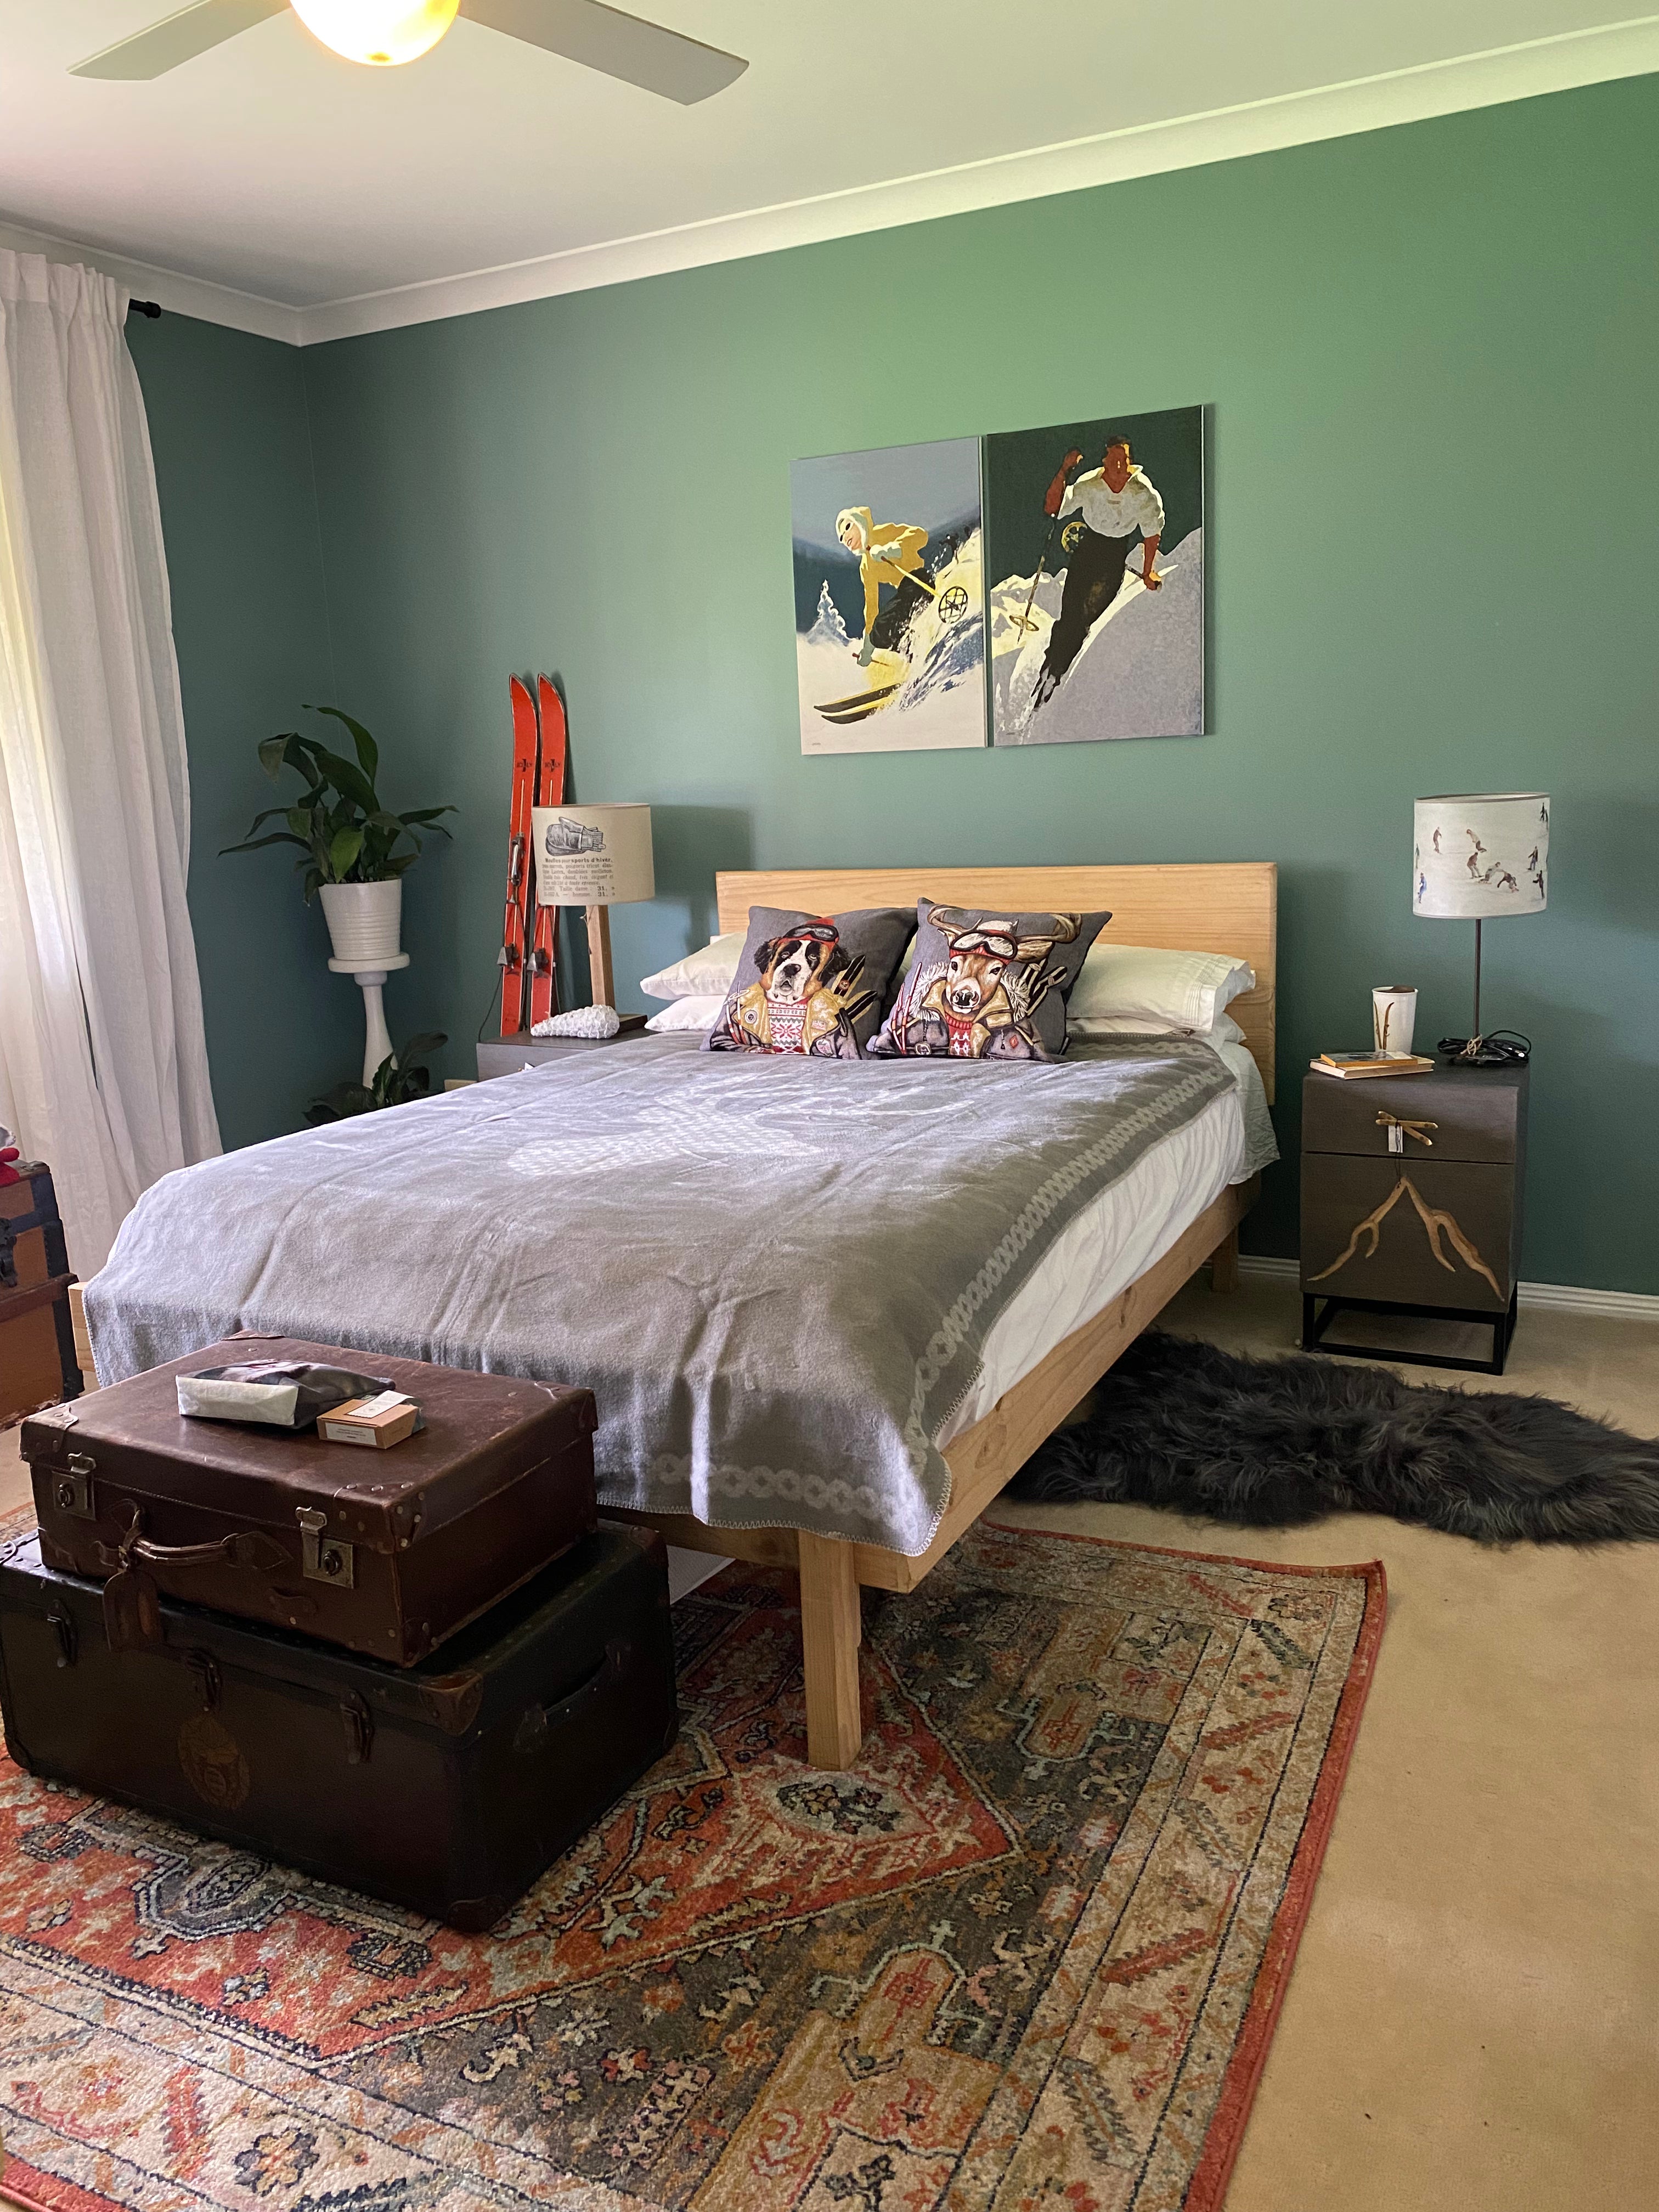 Wide angle view of a guest bedroom, with the Snowboarding lamp on the right hand bedside table. Room painted green, with vintage suitcases at the end of the bed and vintage orange skis leaning against the wall. Grey Deer blanket on the bed and two throw cushions